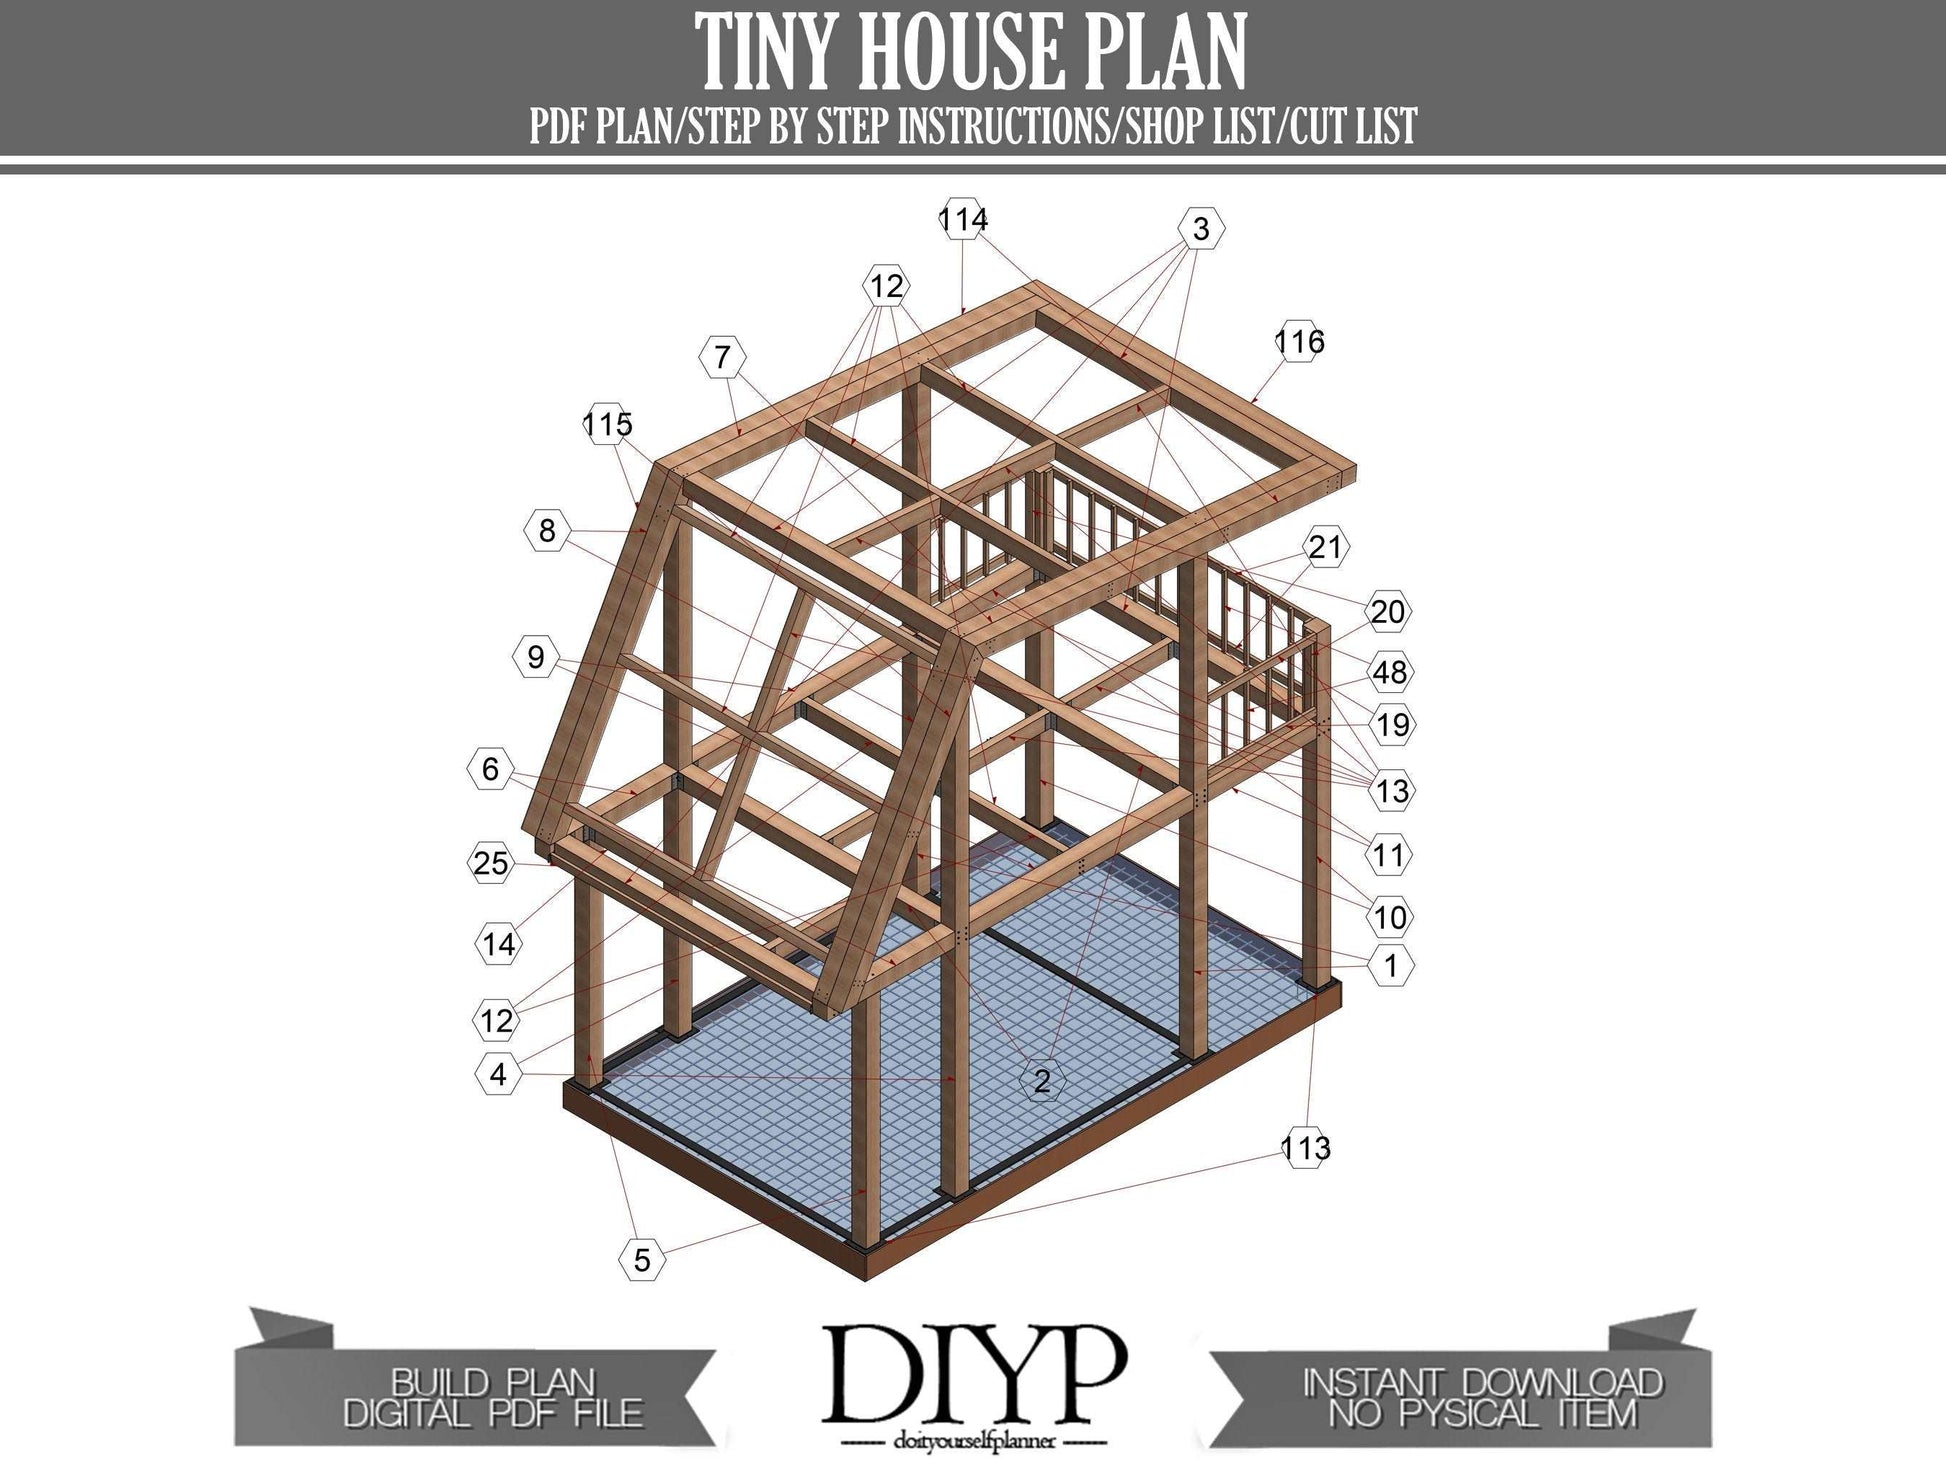 2 bedroom tiny house 530sqft | House Design | Basic Floor Plan, with Elevation Sections | Digital Download PDF